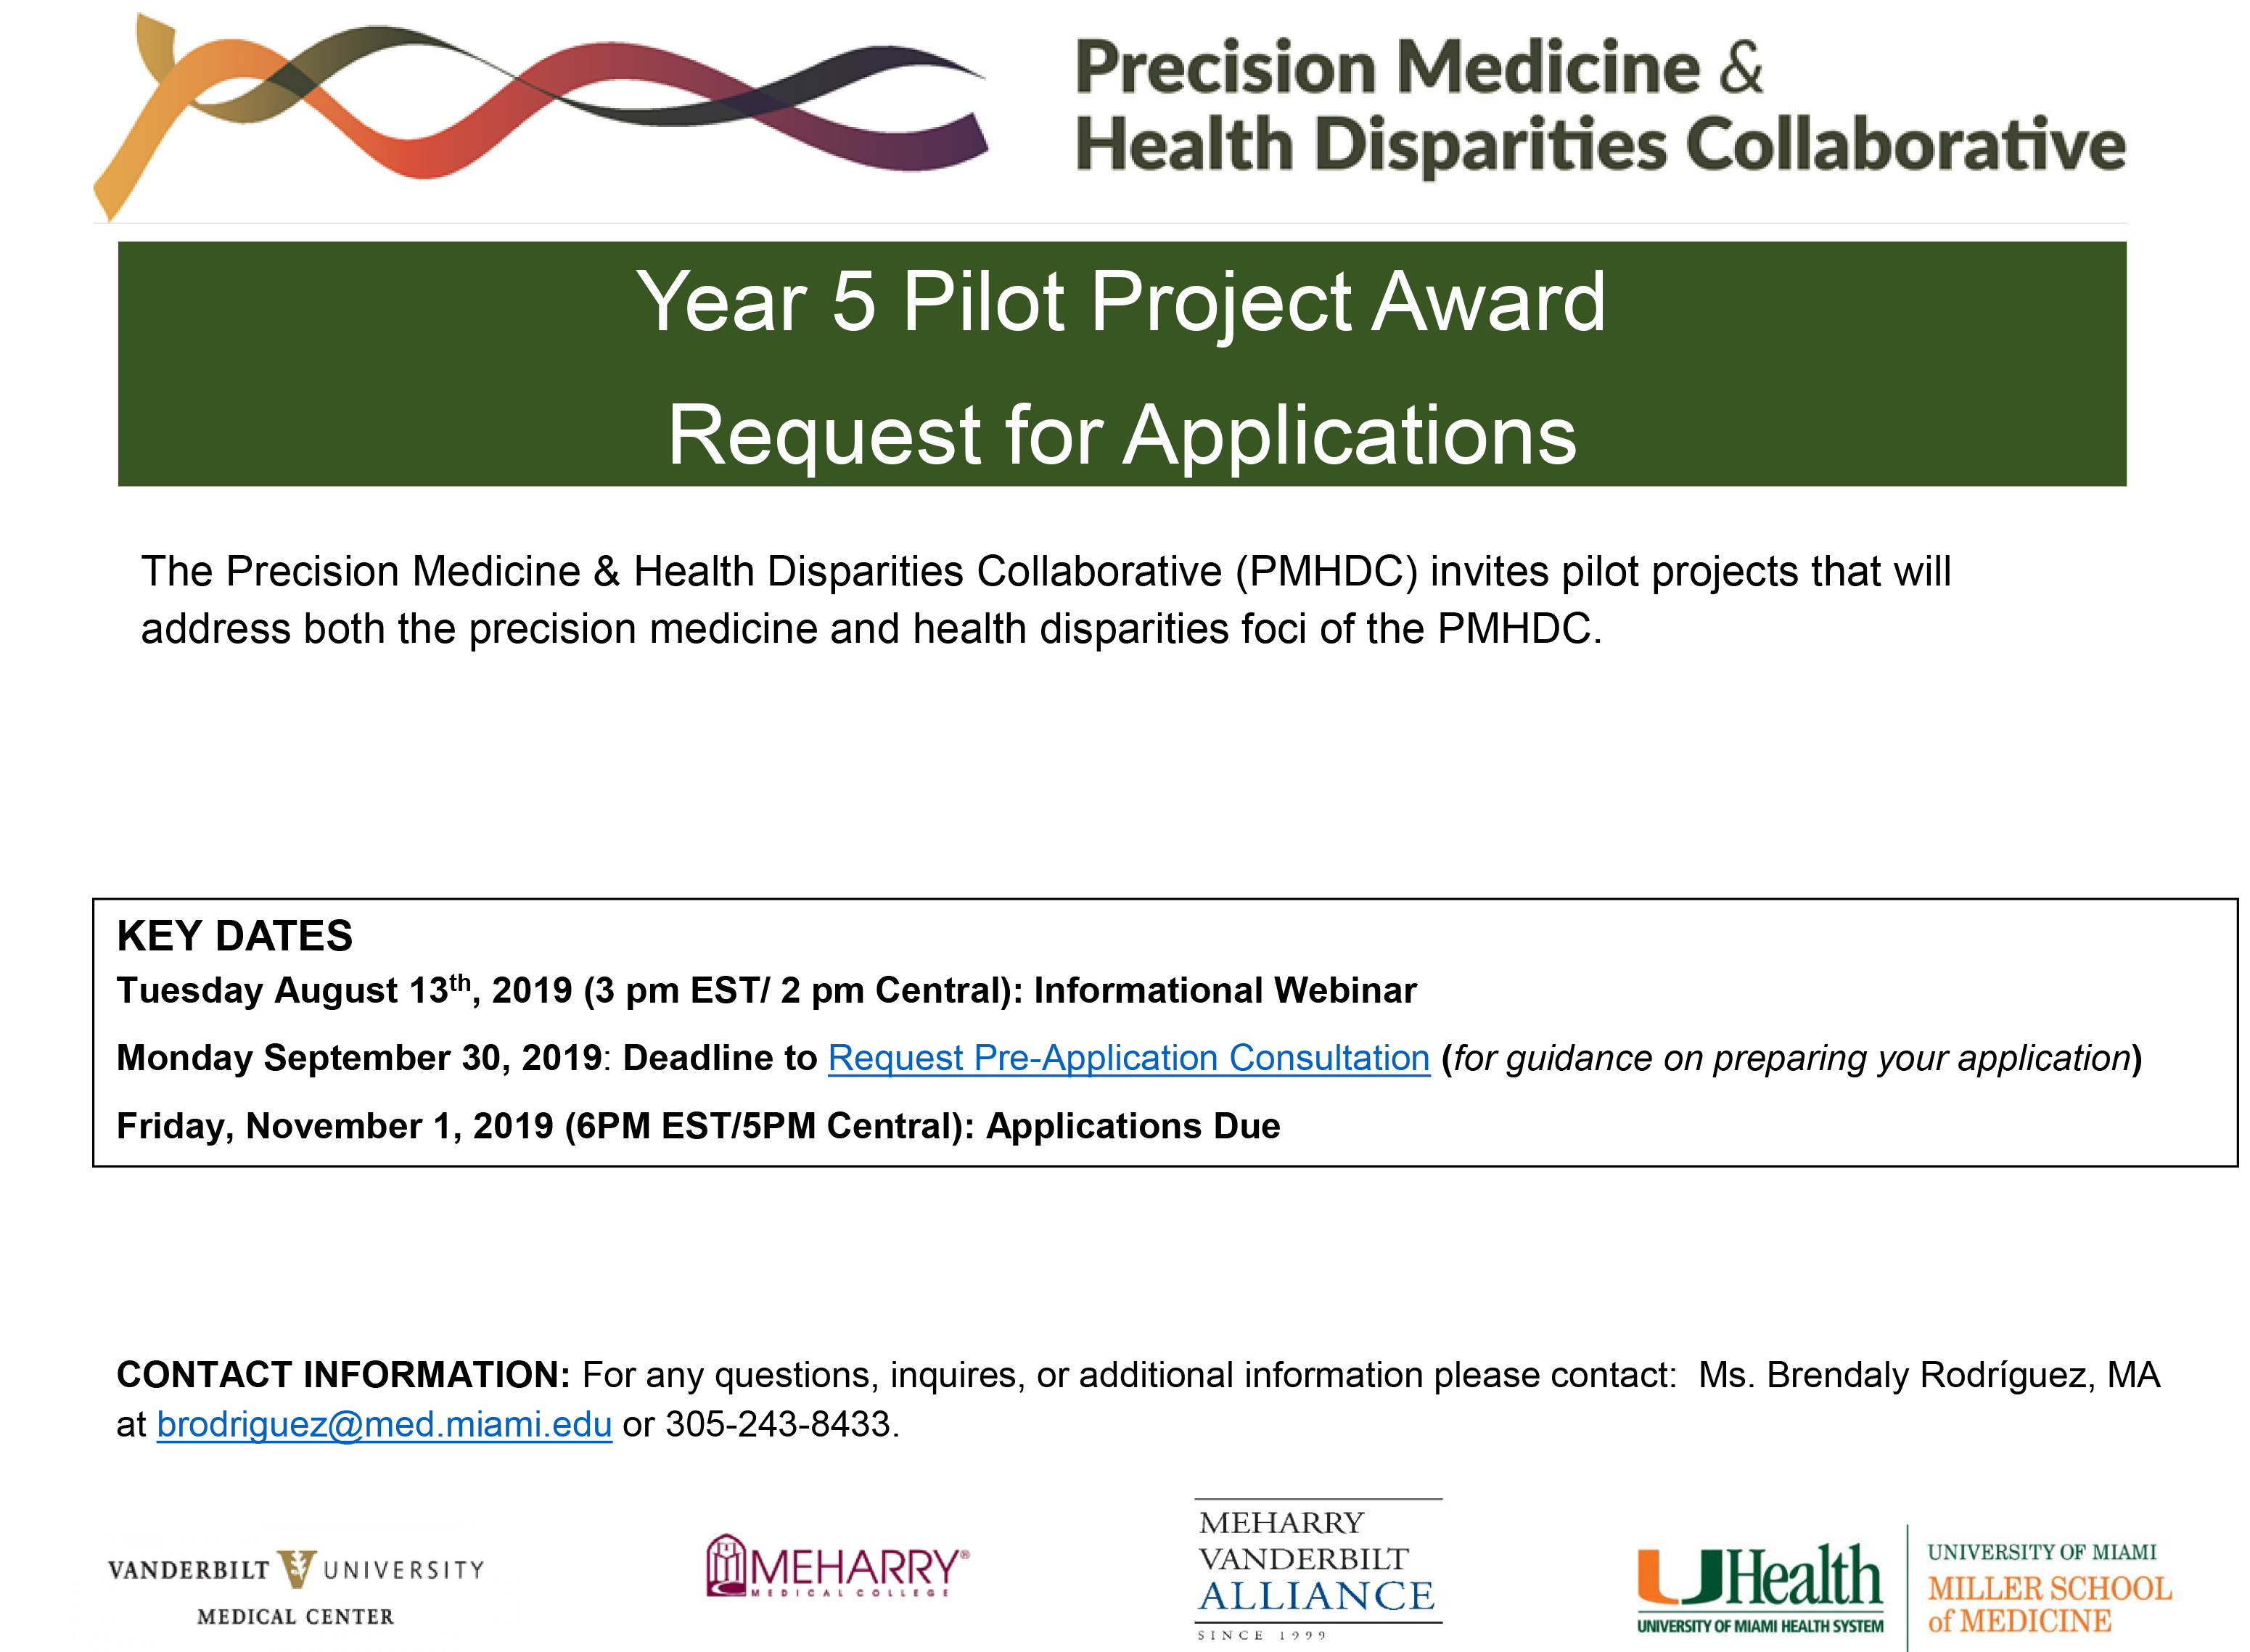 PMHDC Year 5 Pilot Project Award Request for Applications